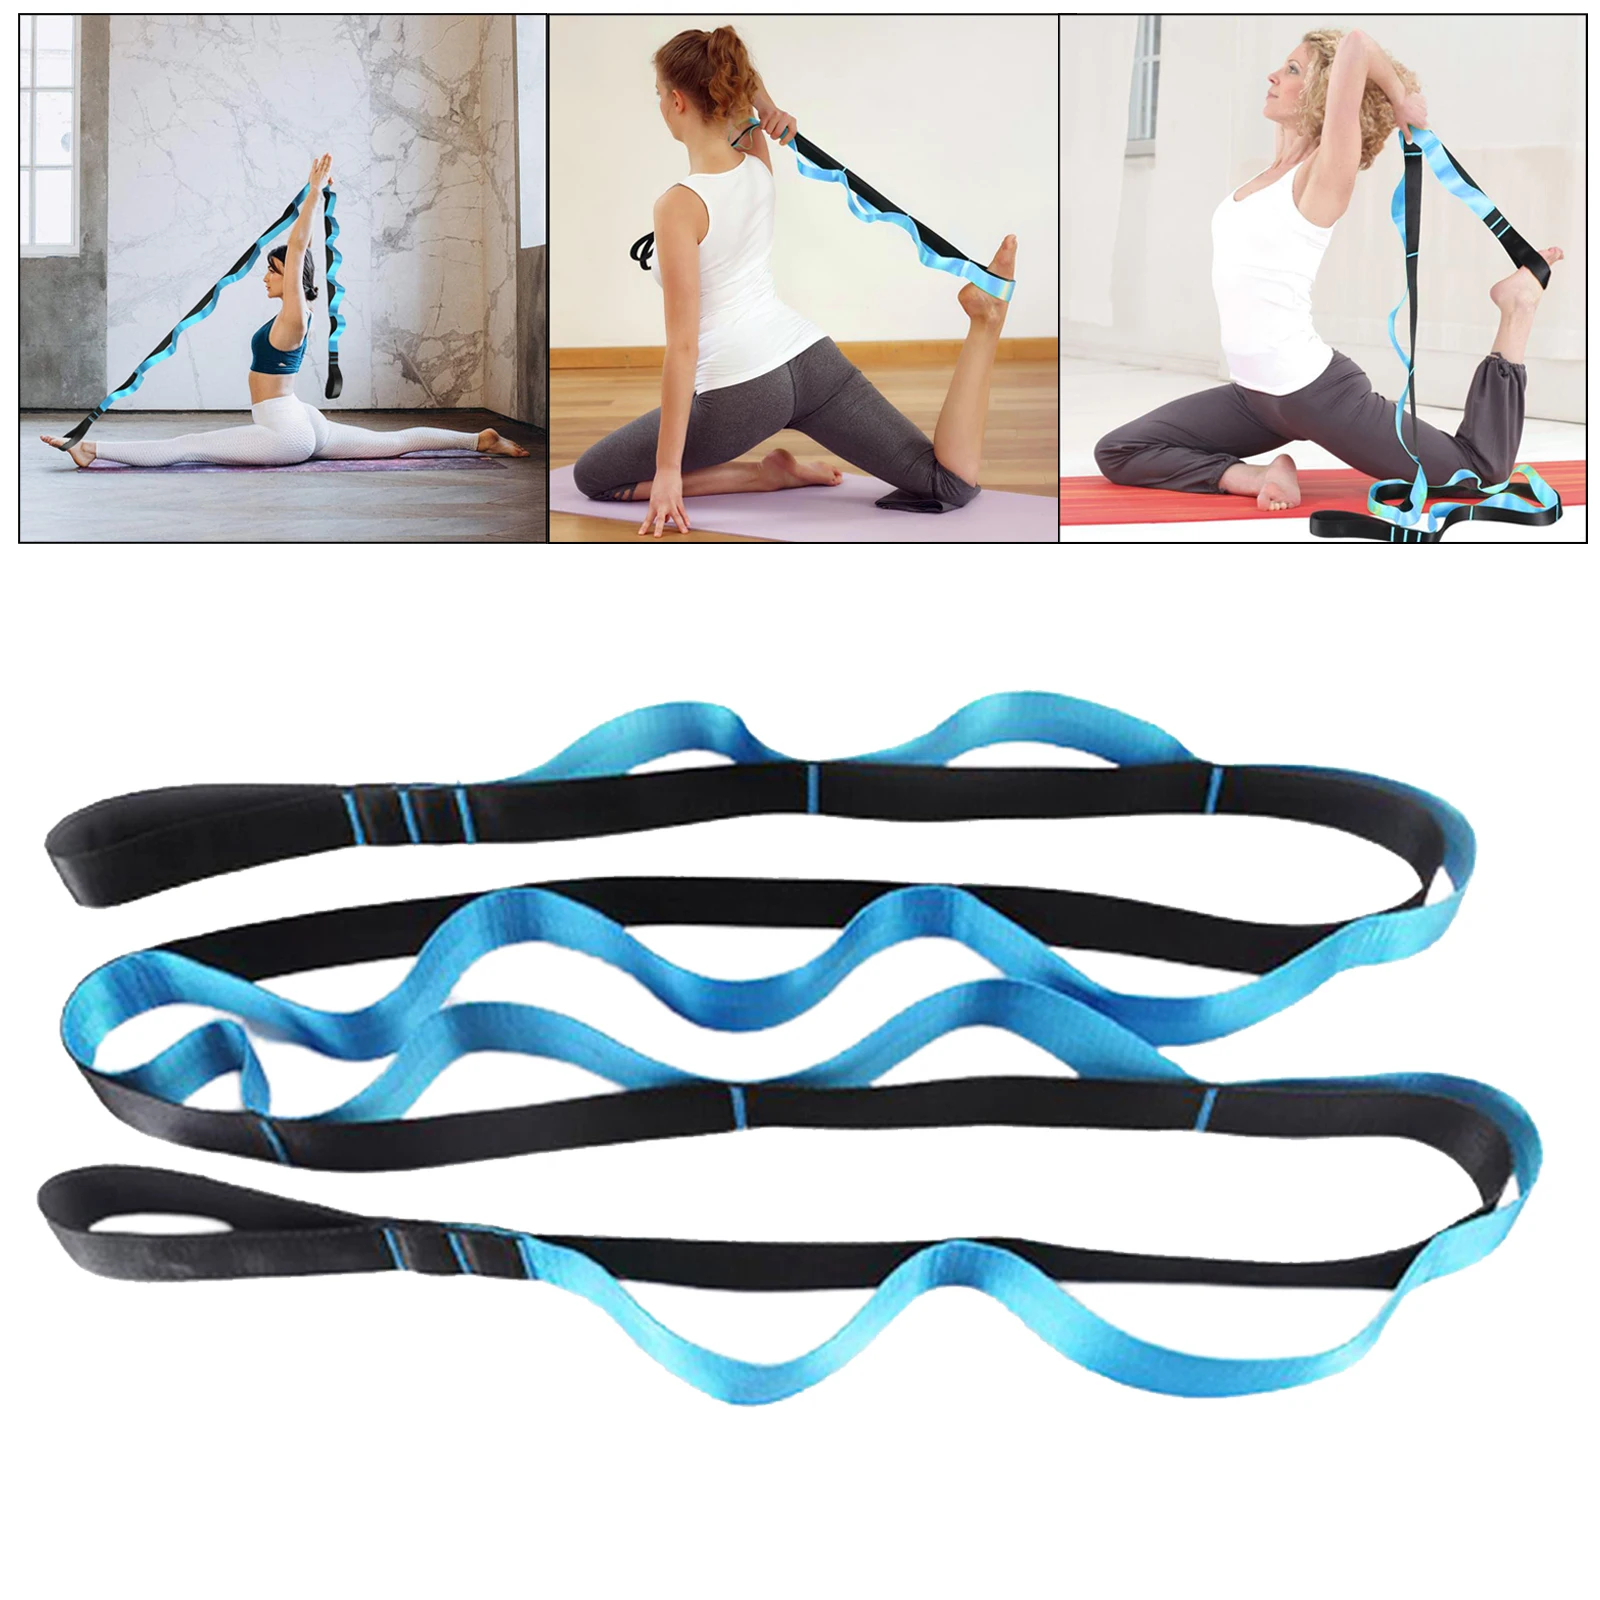 Fitness Exercise Stretch Strap Women Latin Yoga Yoga Elastic Pull Belt Strap Sports Yoga Resistance Band For Body Building